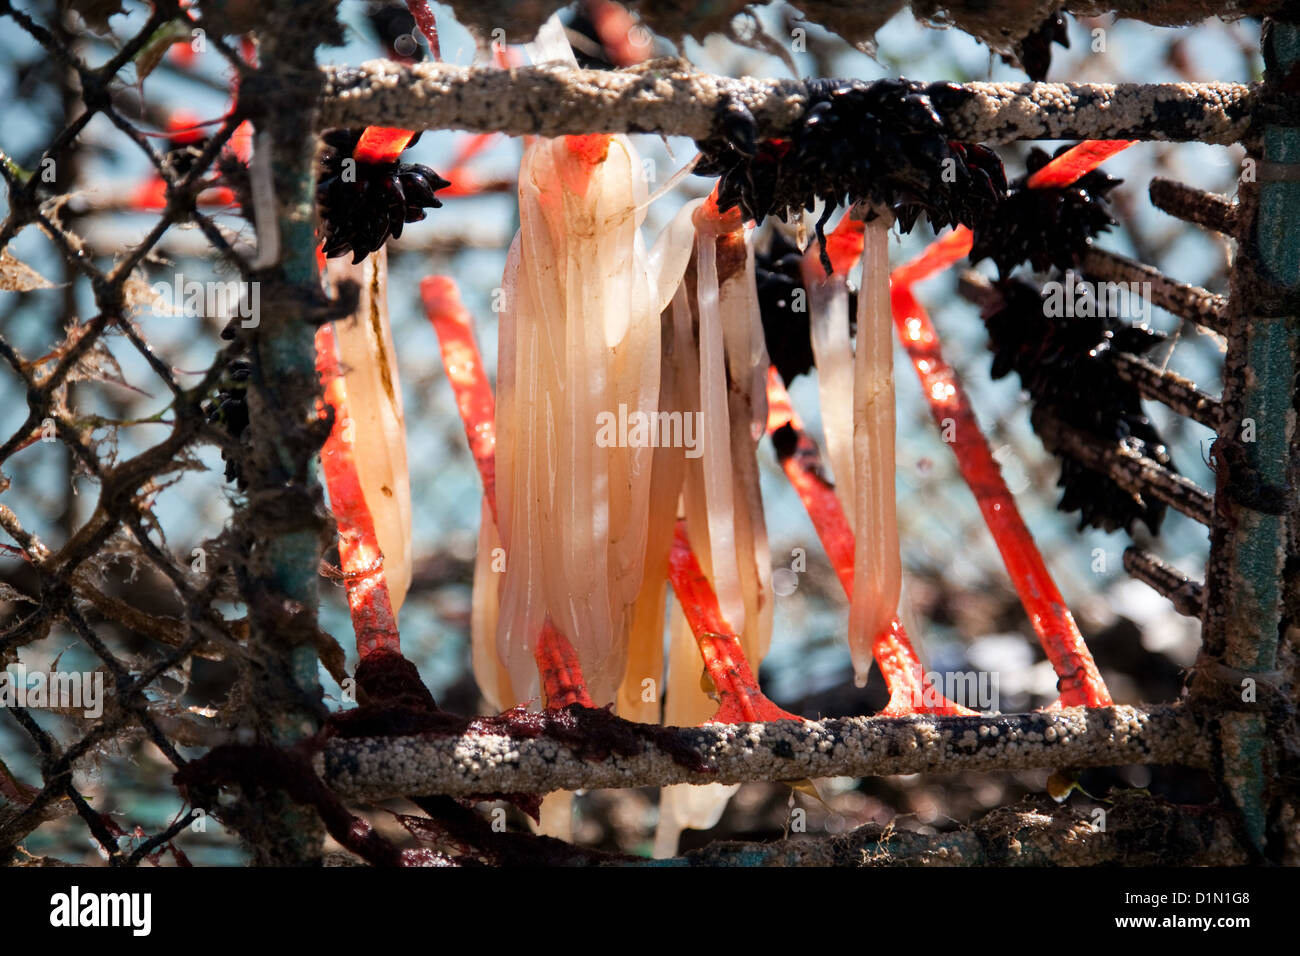 Cuttlefish pot with cuttlefish eggs and squid eggs hanging of the mesh, freshly pulled out of the sea. Stock Photo